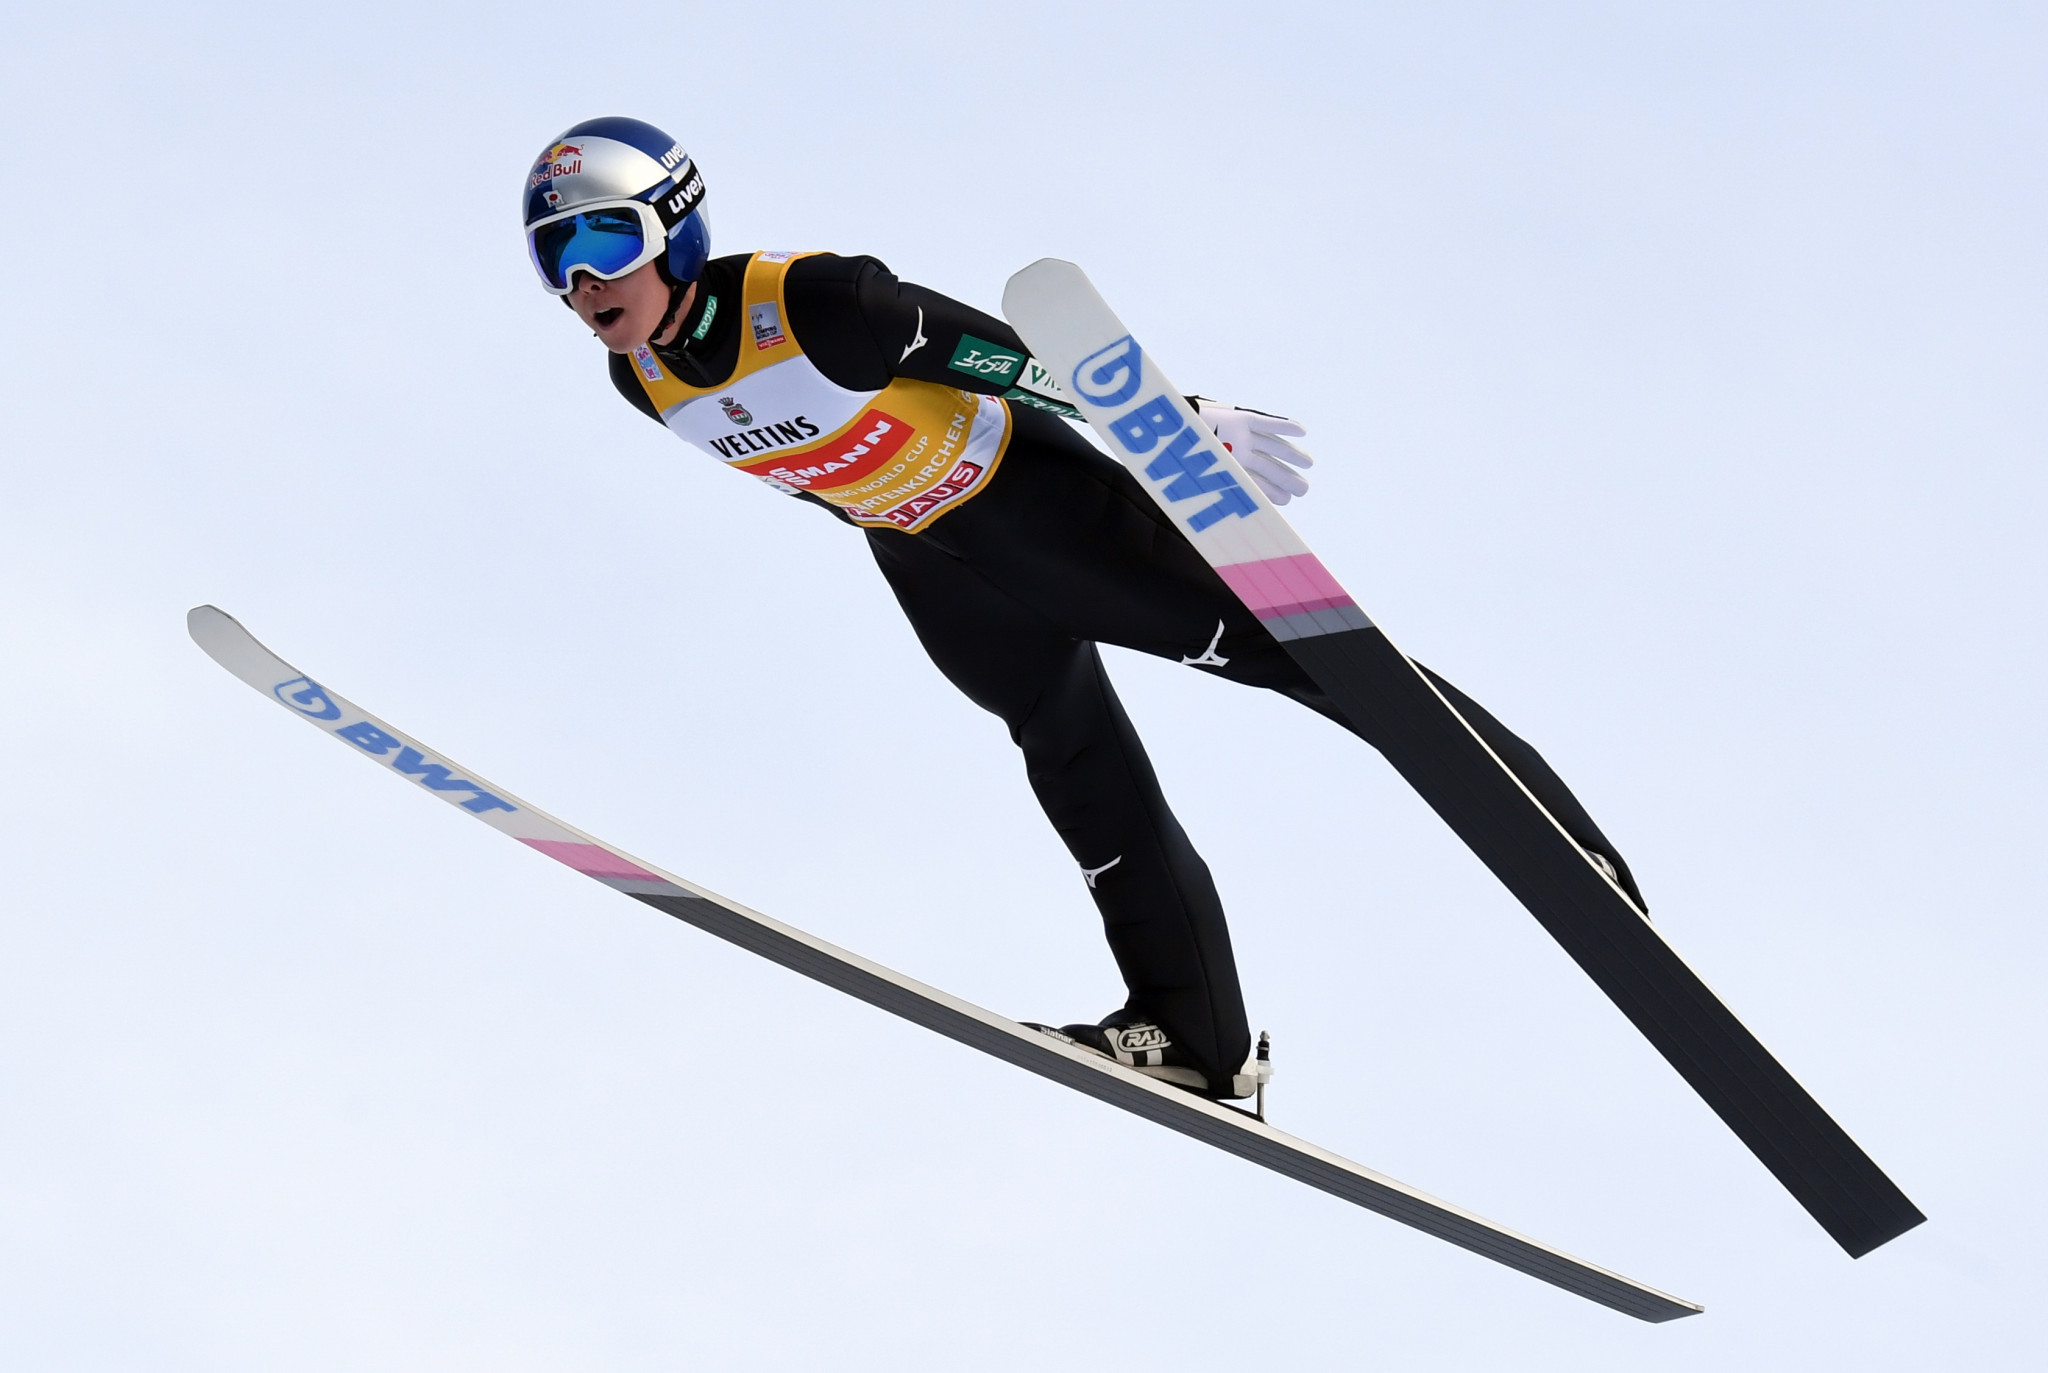 Four Hills Tournament set to continue in Innsbruck